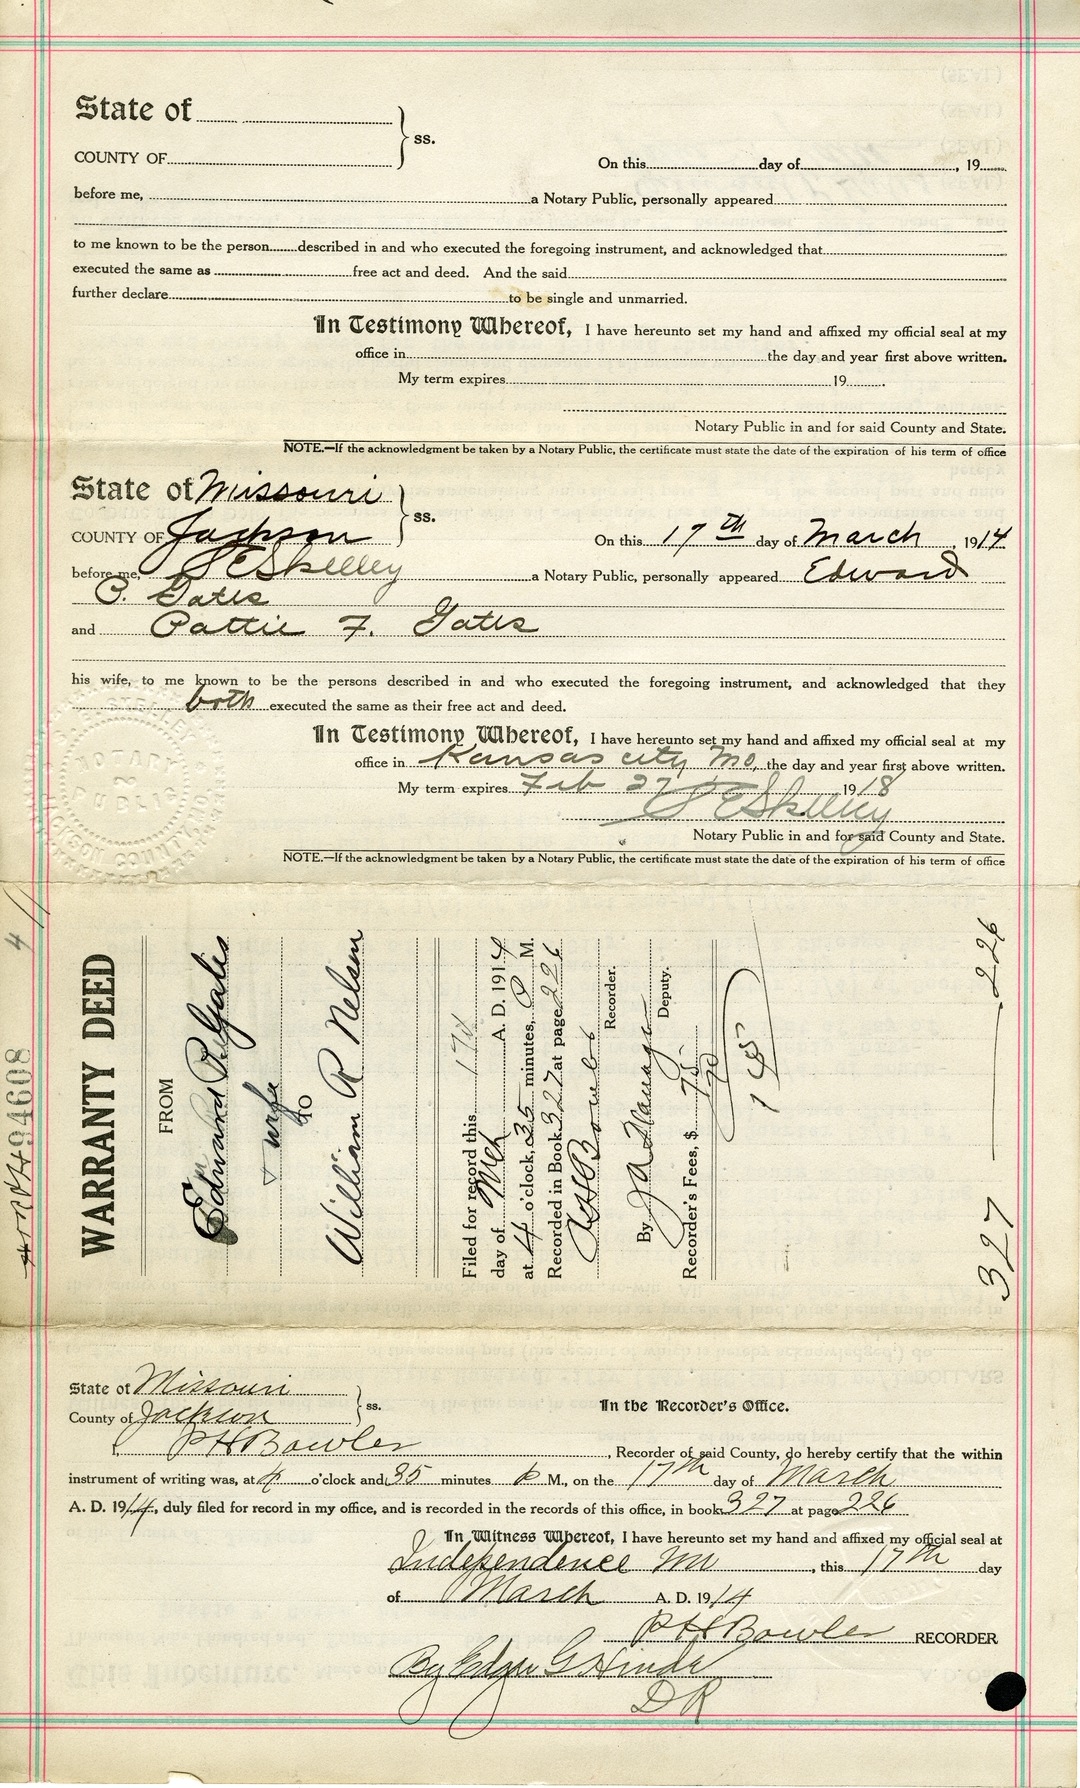 Warranty Deed from Edward P. Gates and Pattie F. Gates to William R. Nelson